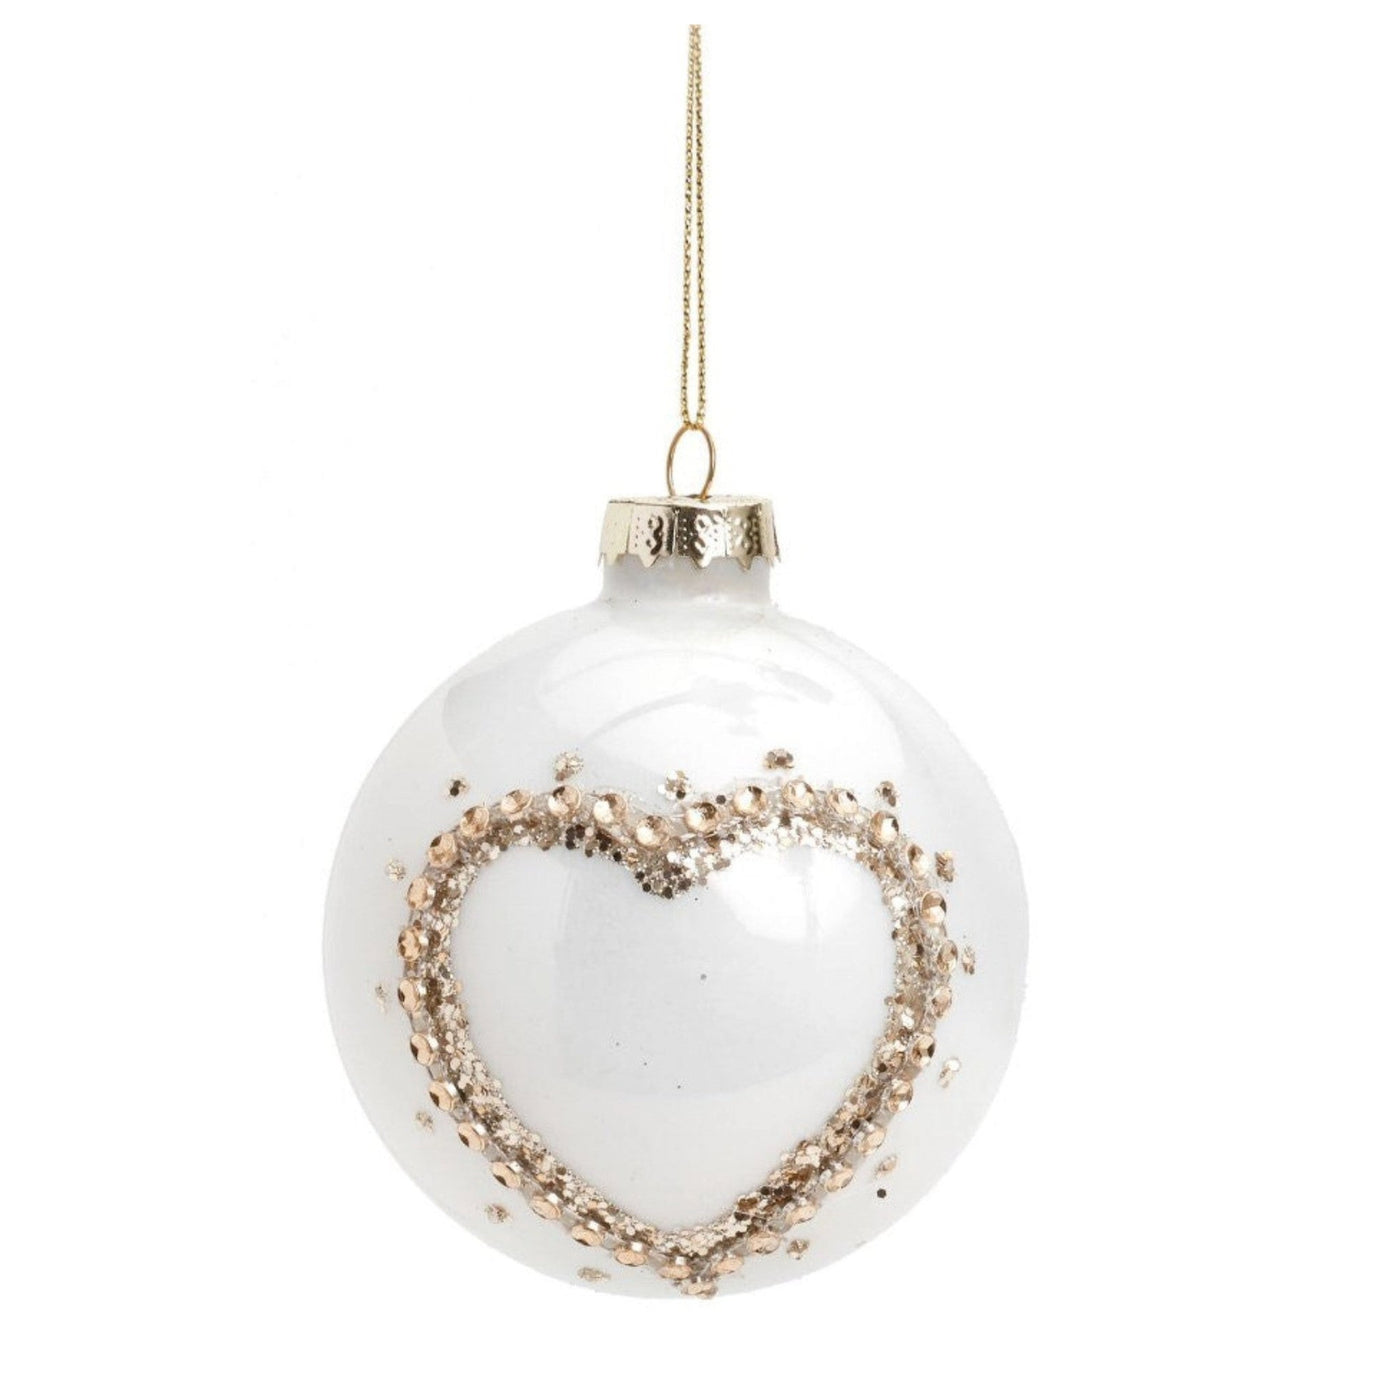 Golden Jeweled Heart Ornaments: White ball with gold heart shape. Set of 6. Perfect for decorating Christmas tree. On sale at Avalon Willow Home in Canada